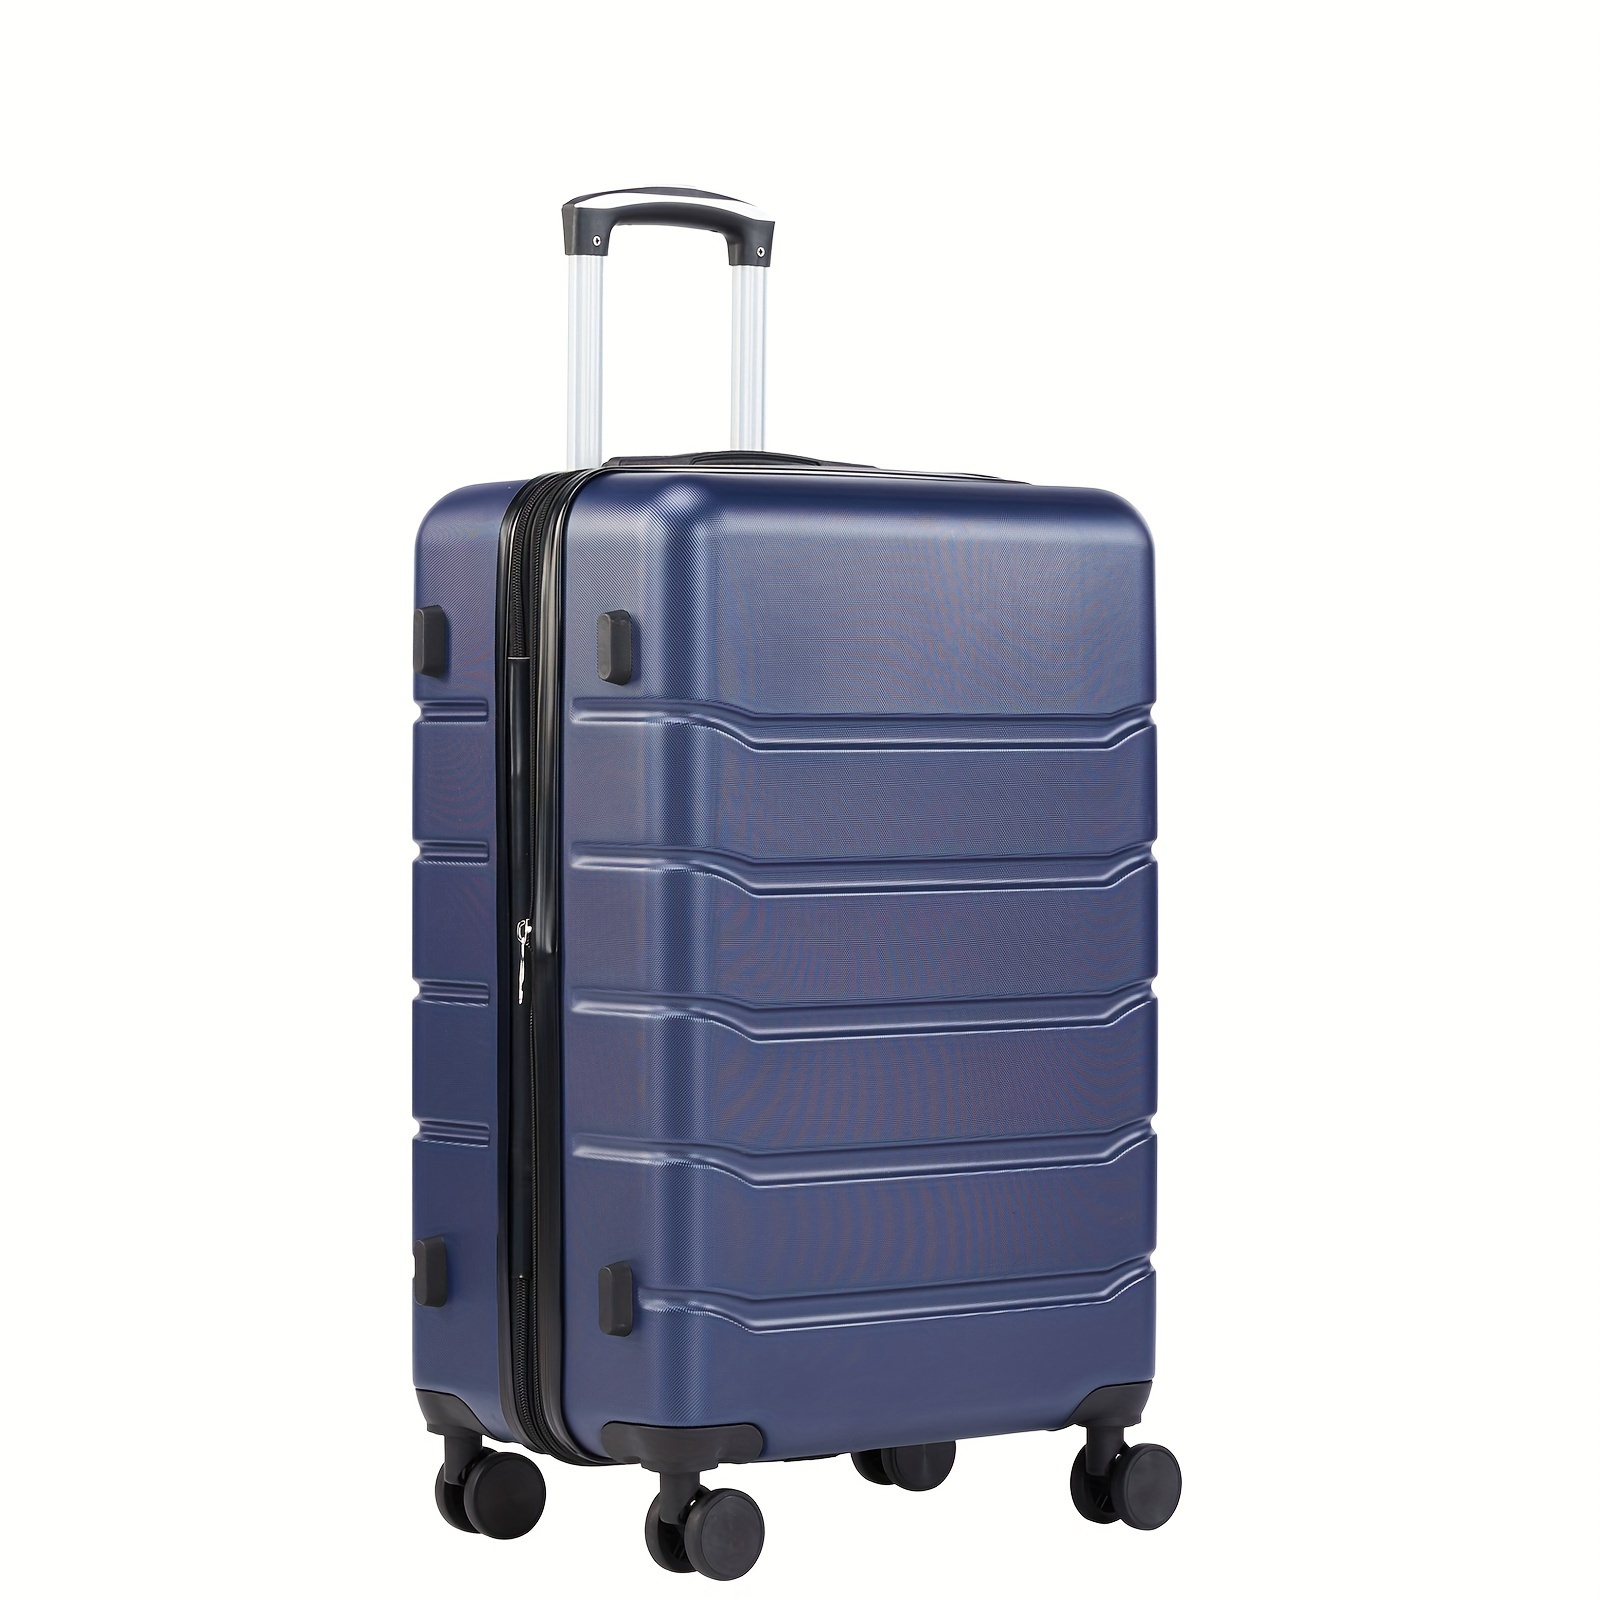 

20 Inch Blue Carry On Luggage, Hard Shell Abs Suitcase With Double Spinner Wheels, Lightweight Expandable Rolling Luggage With Tsa Lock